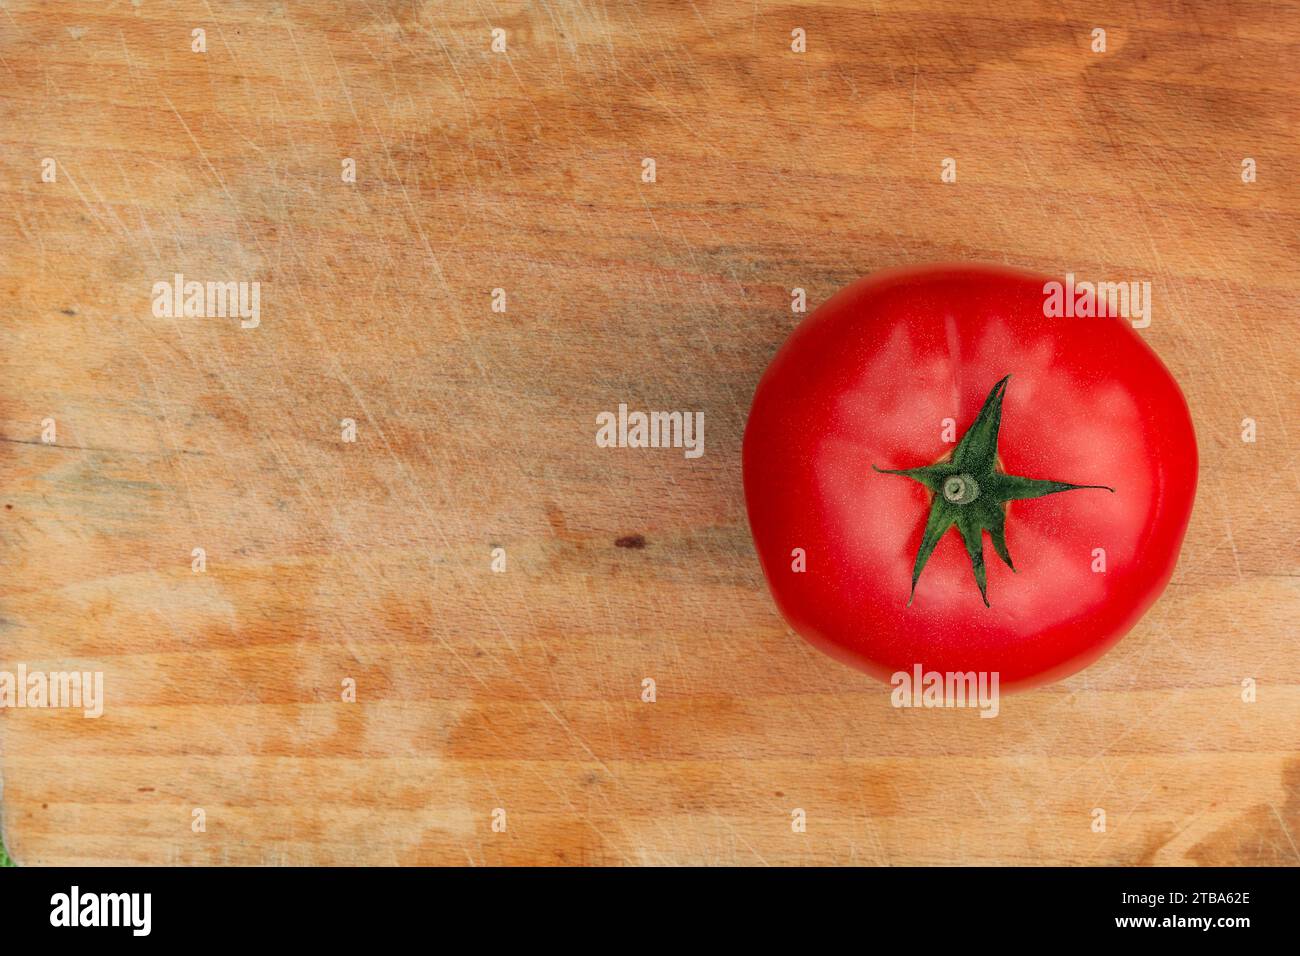 Cutting vegetables preparing salad red tomato on a wooden board Stock Photo